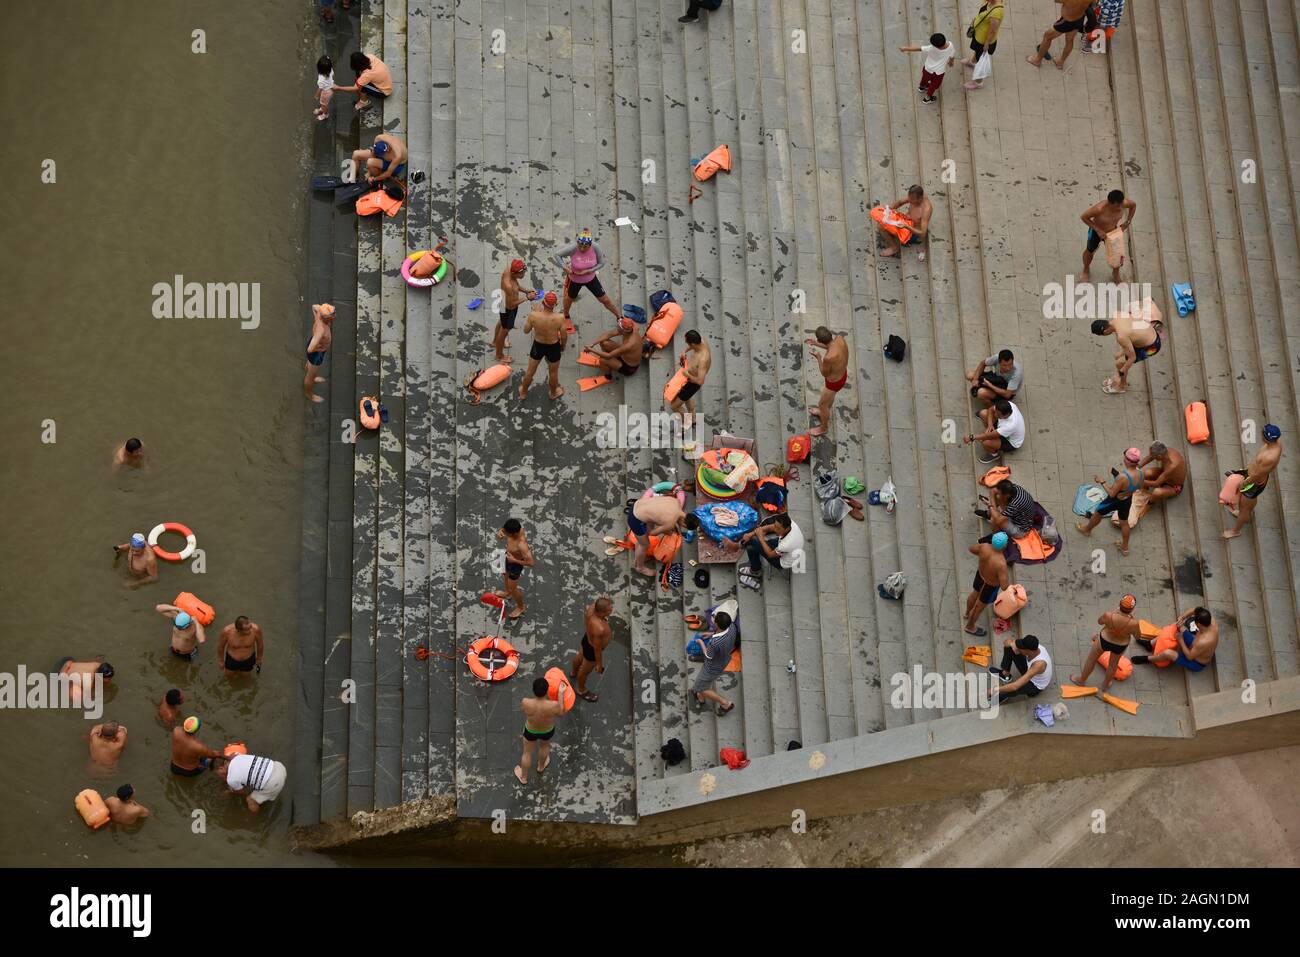 Swimmers in Yangtze River, Wuhan, China Stock Photo